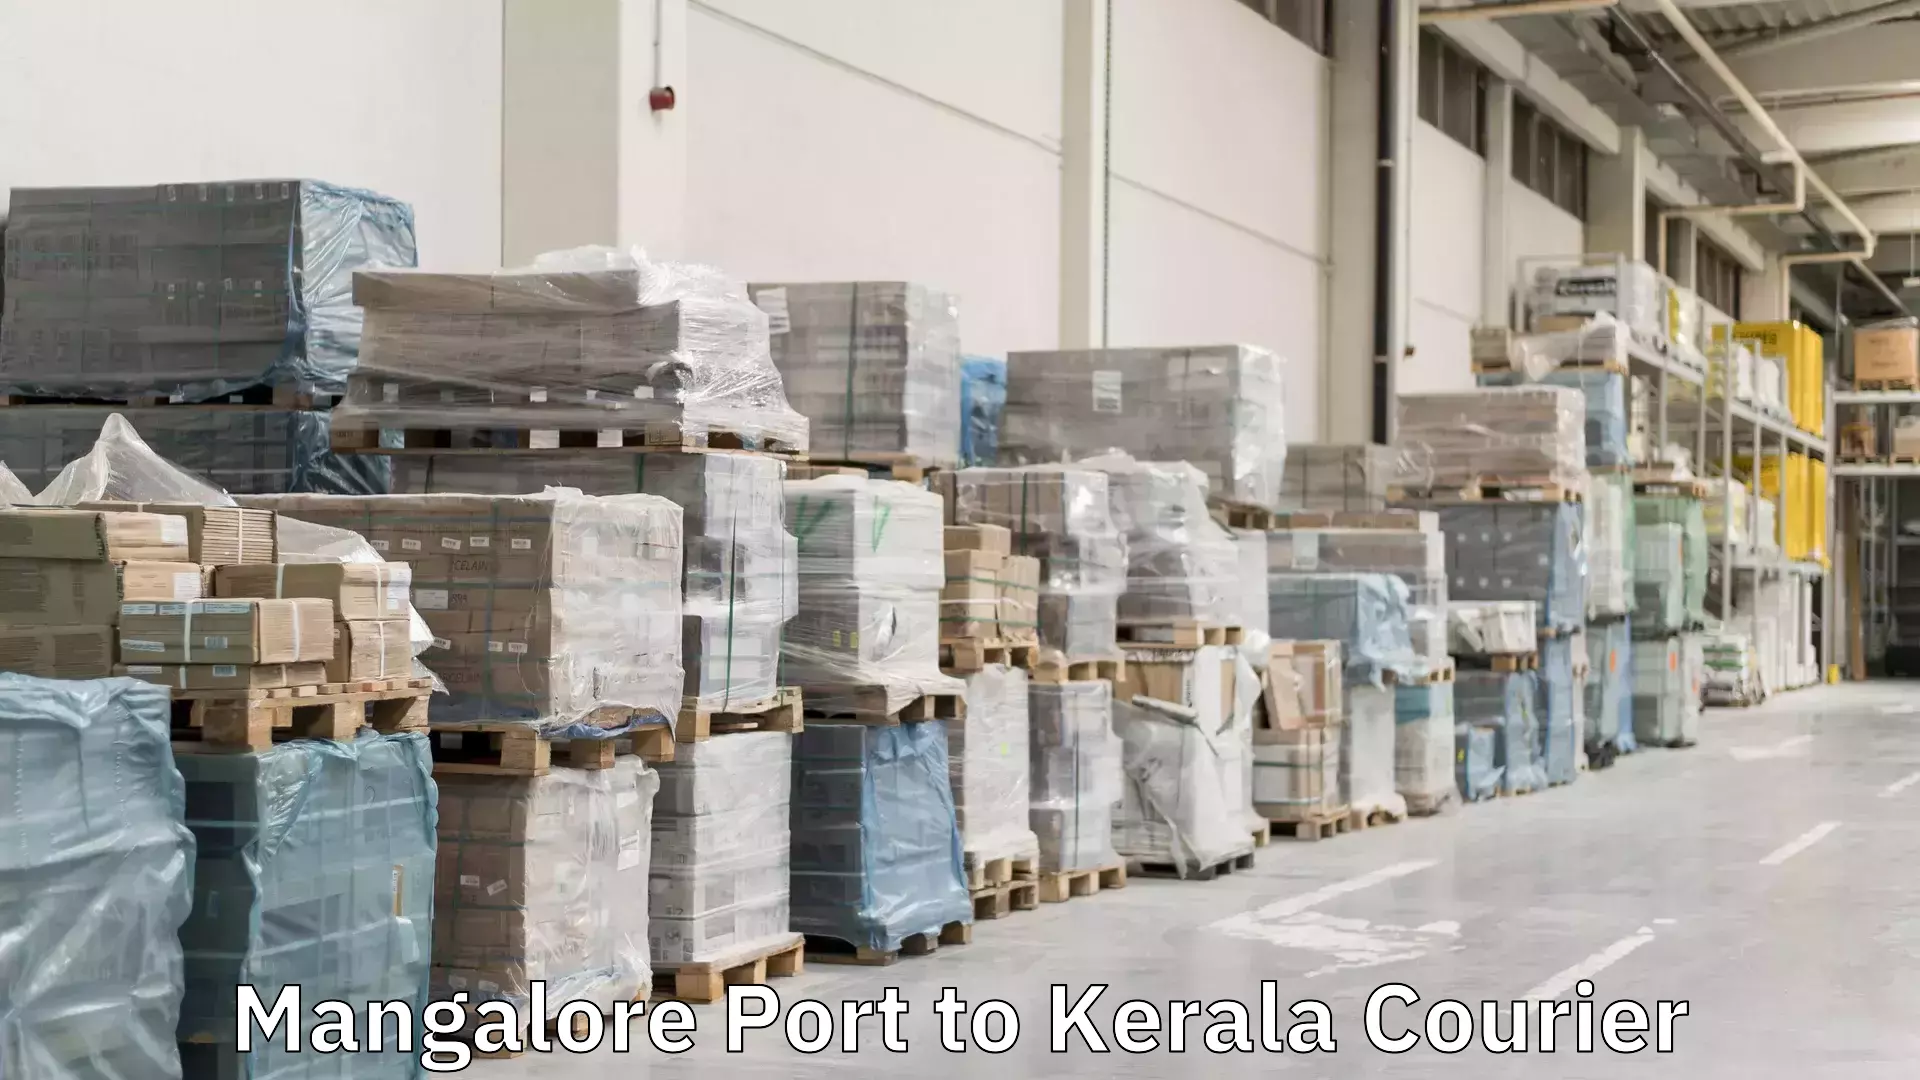 Emergency parcel delivery in Mangalore Port to Kerala